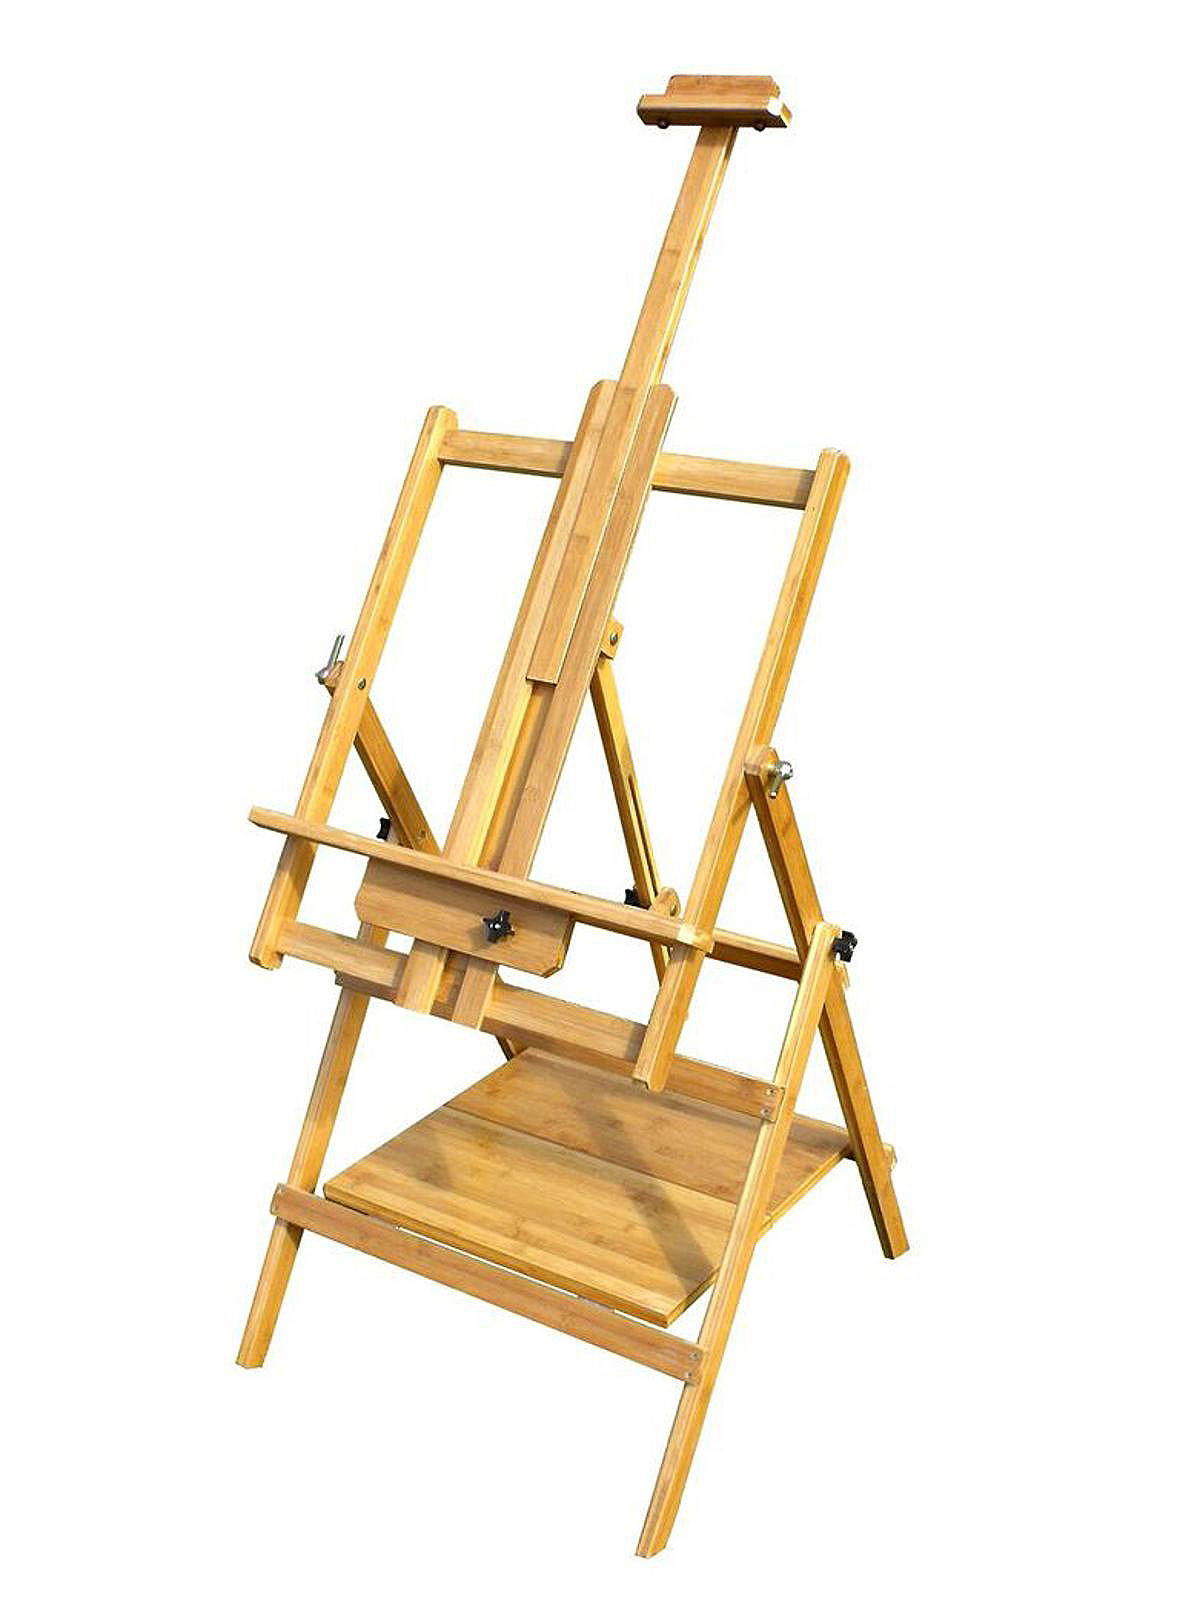 This Art Easel is Made of Bamboo, a Durable Unit for Long-Lasting Use!